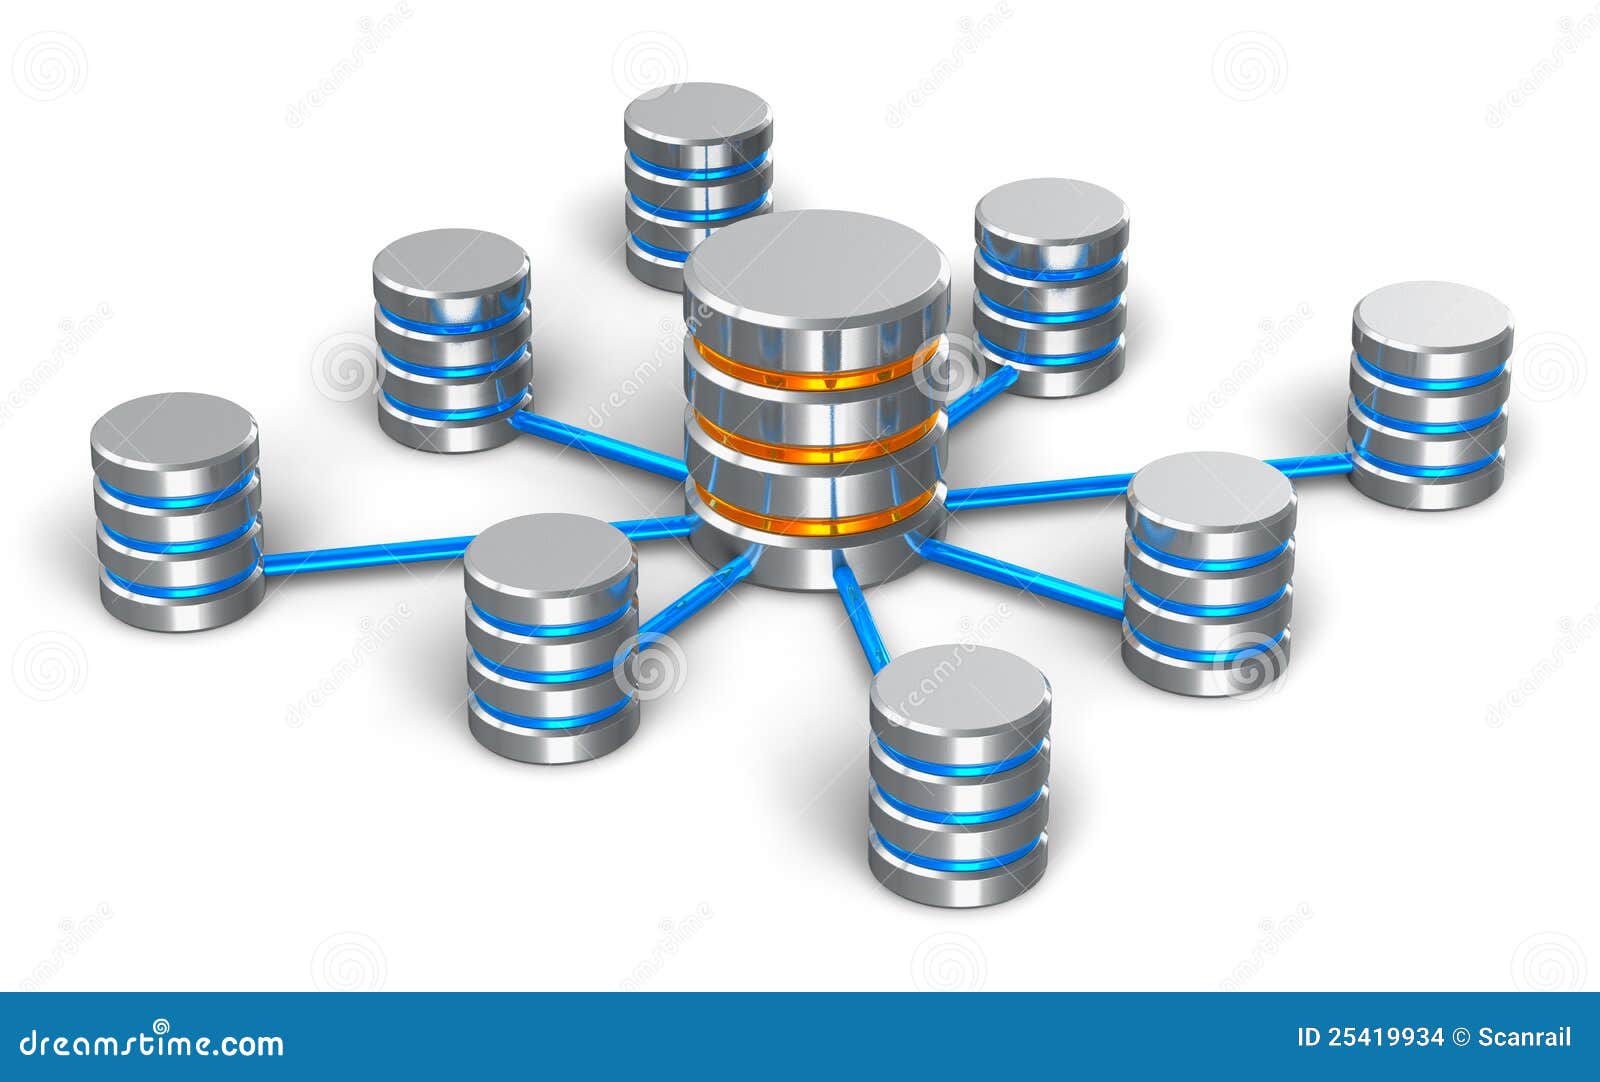 database and networking concept